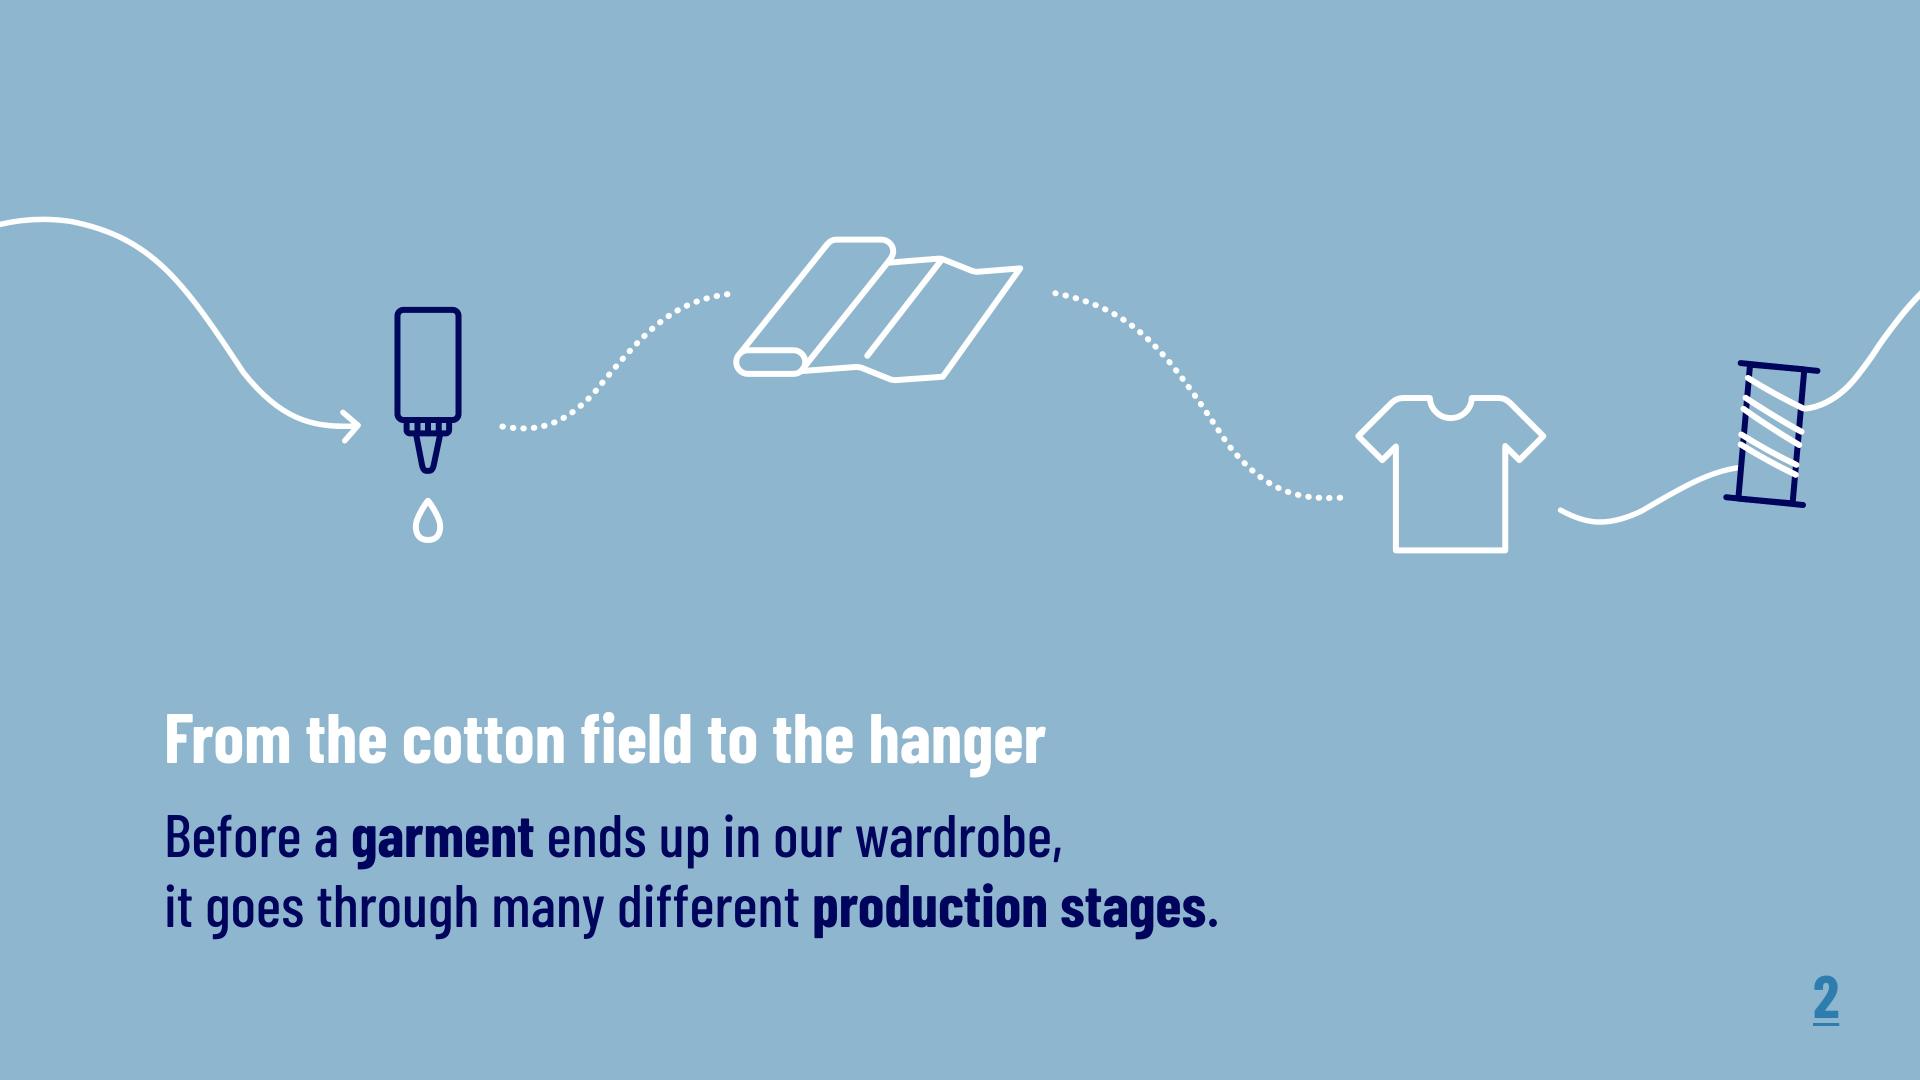 From the cotton field to the hanger: Before a garment ends up in our wardrobe, it goes through many different production stages.